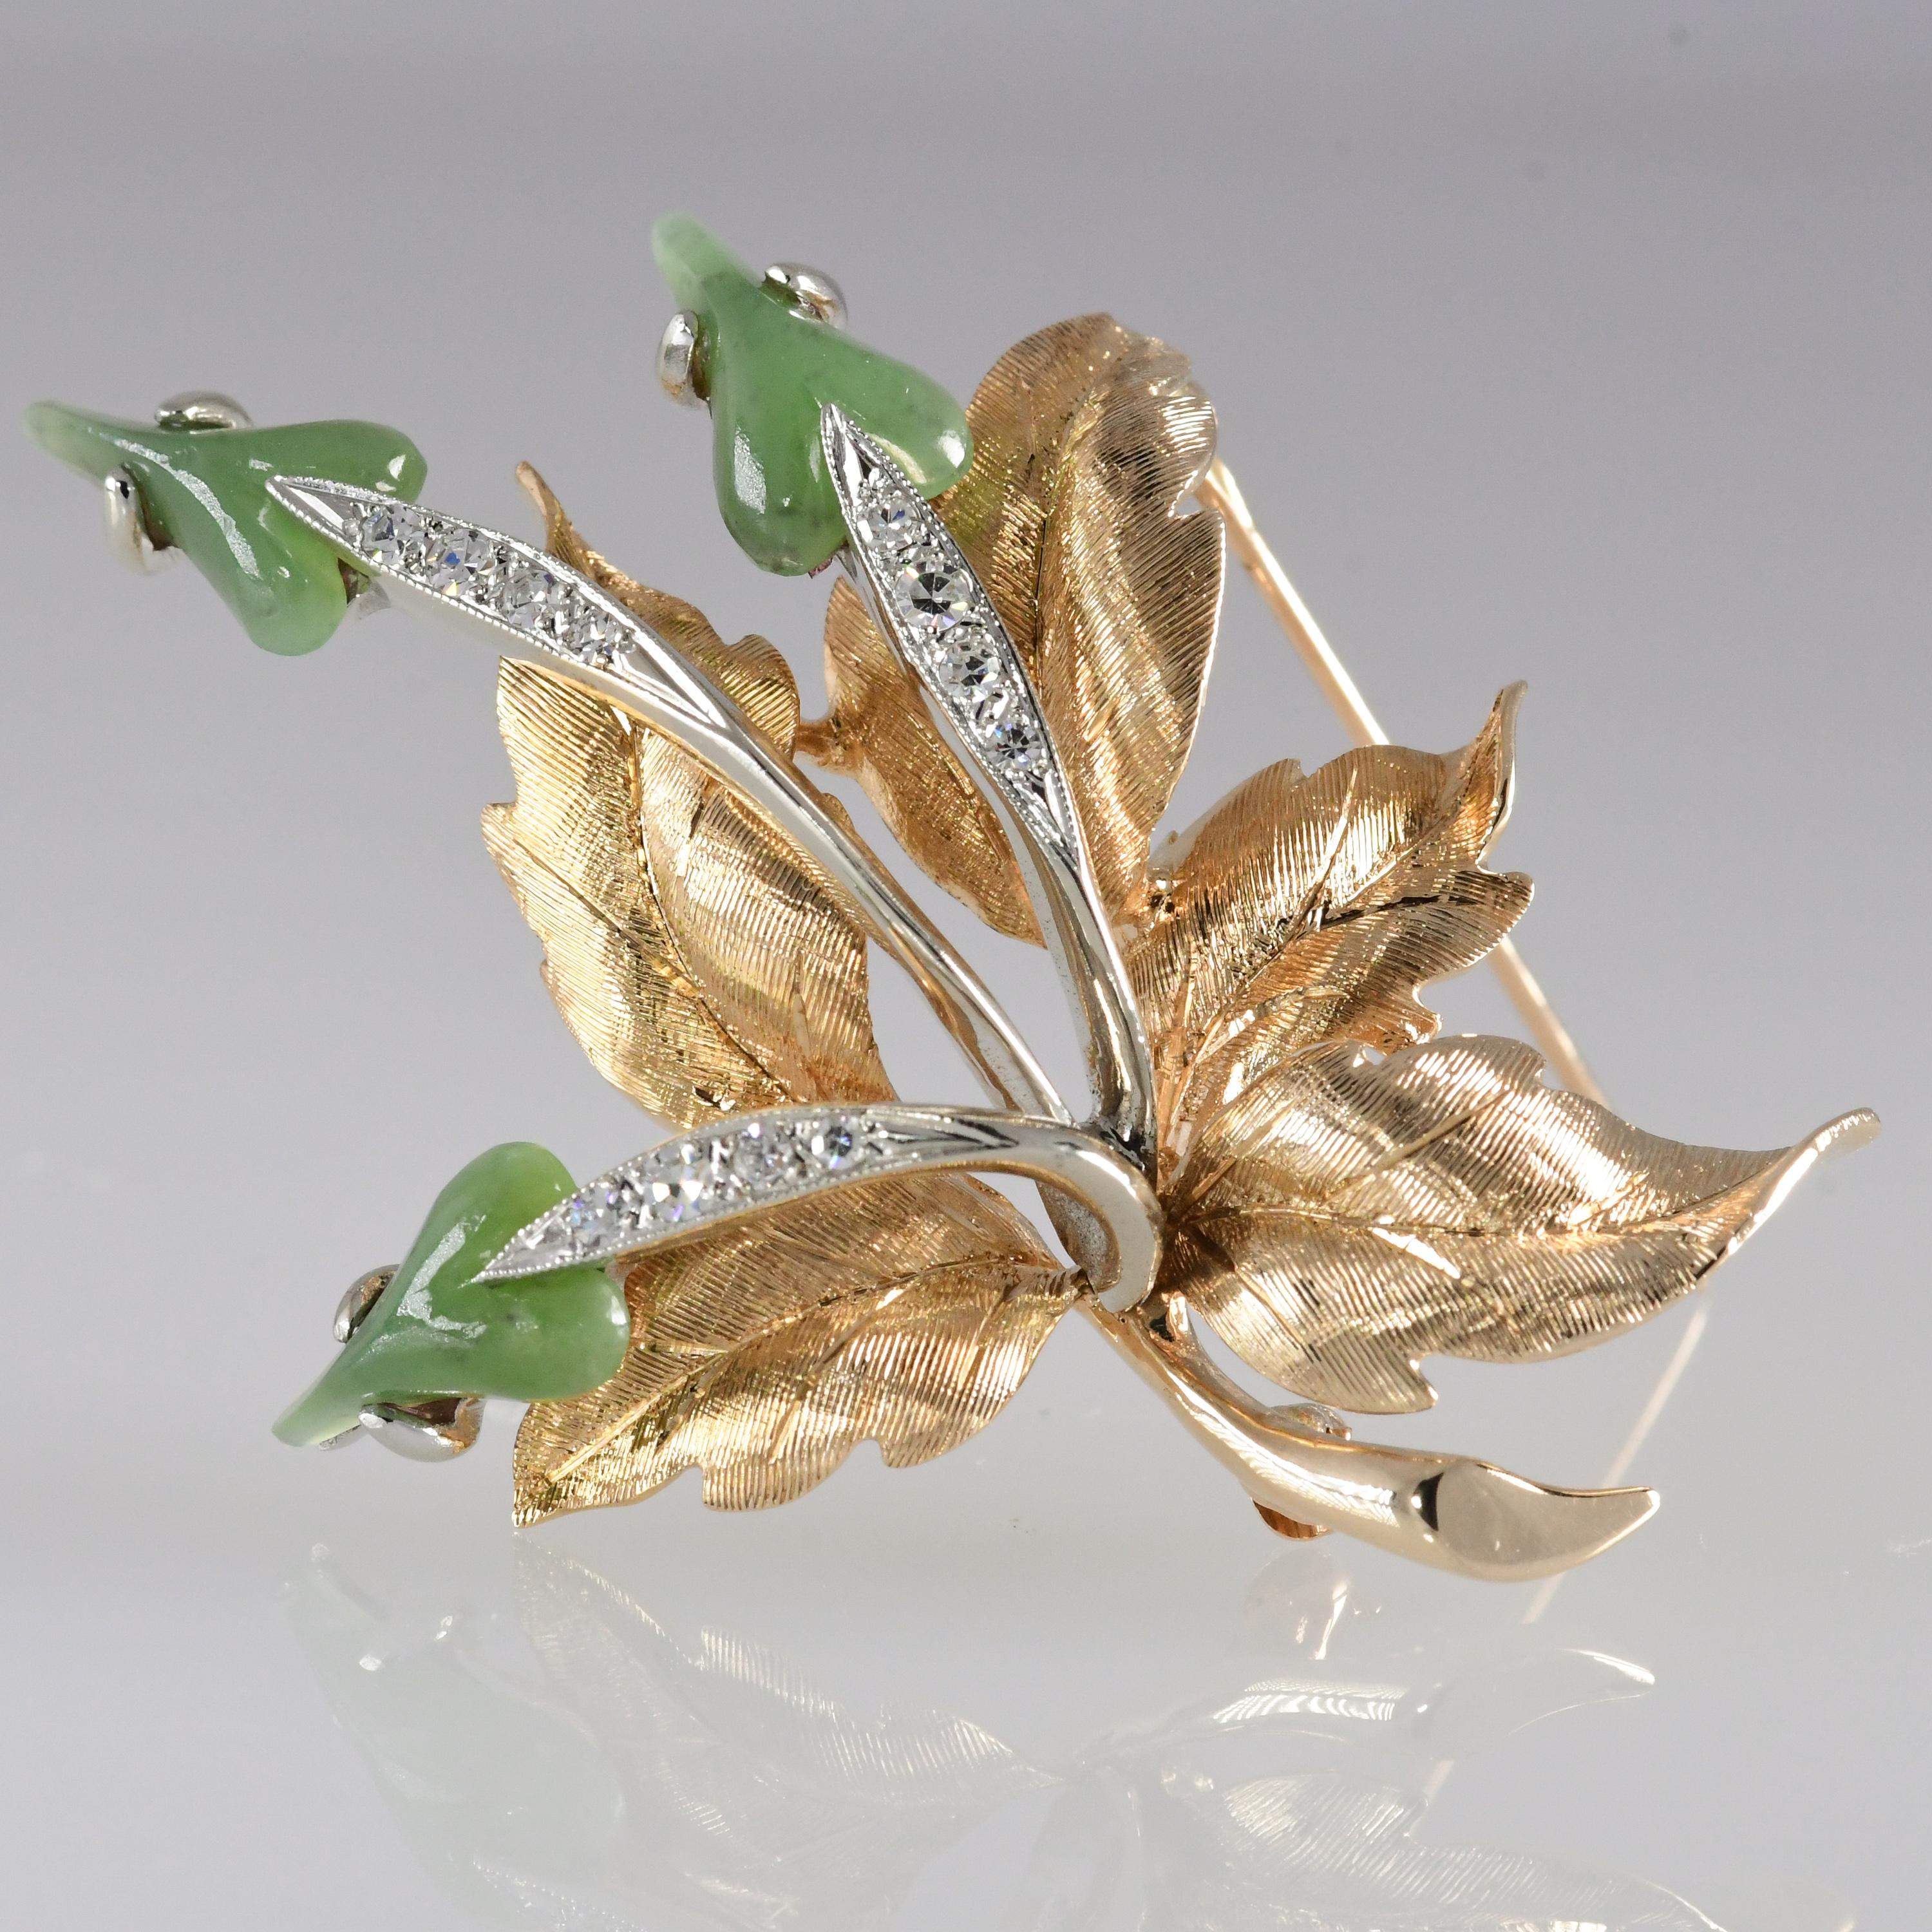  Stunning 14kt yellow gold vintage brooch with jade leaf shaped blossoms, diamond stems, and intricate gold carved leaves, Outstanding design. The diamonds total .20 carat and are VS; G-H quality. The brooch measures 2 inches long and 1 1/2 inch